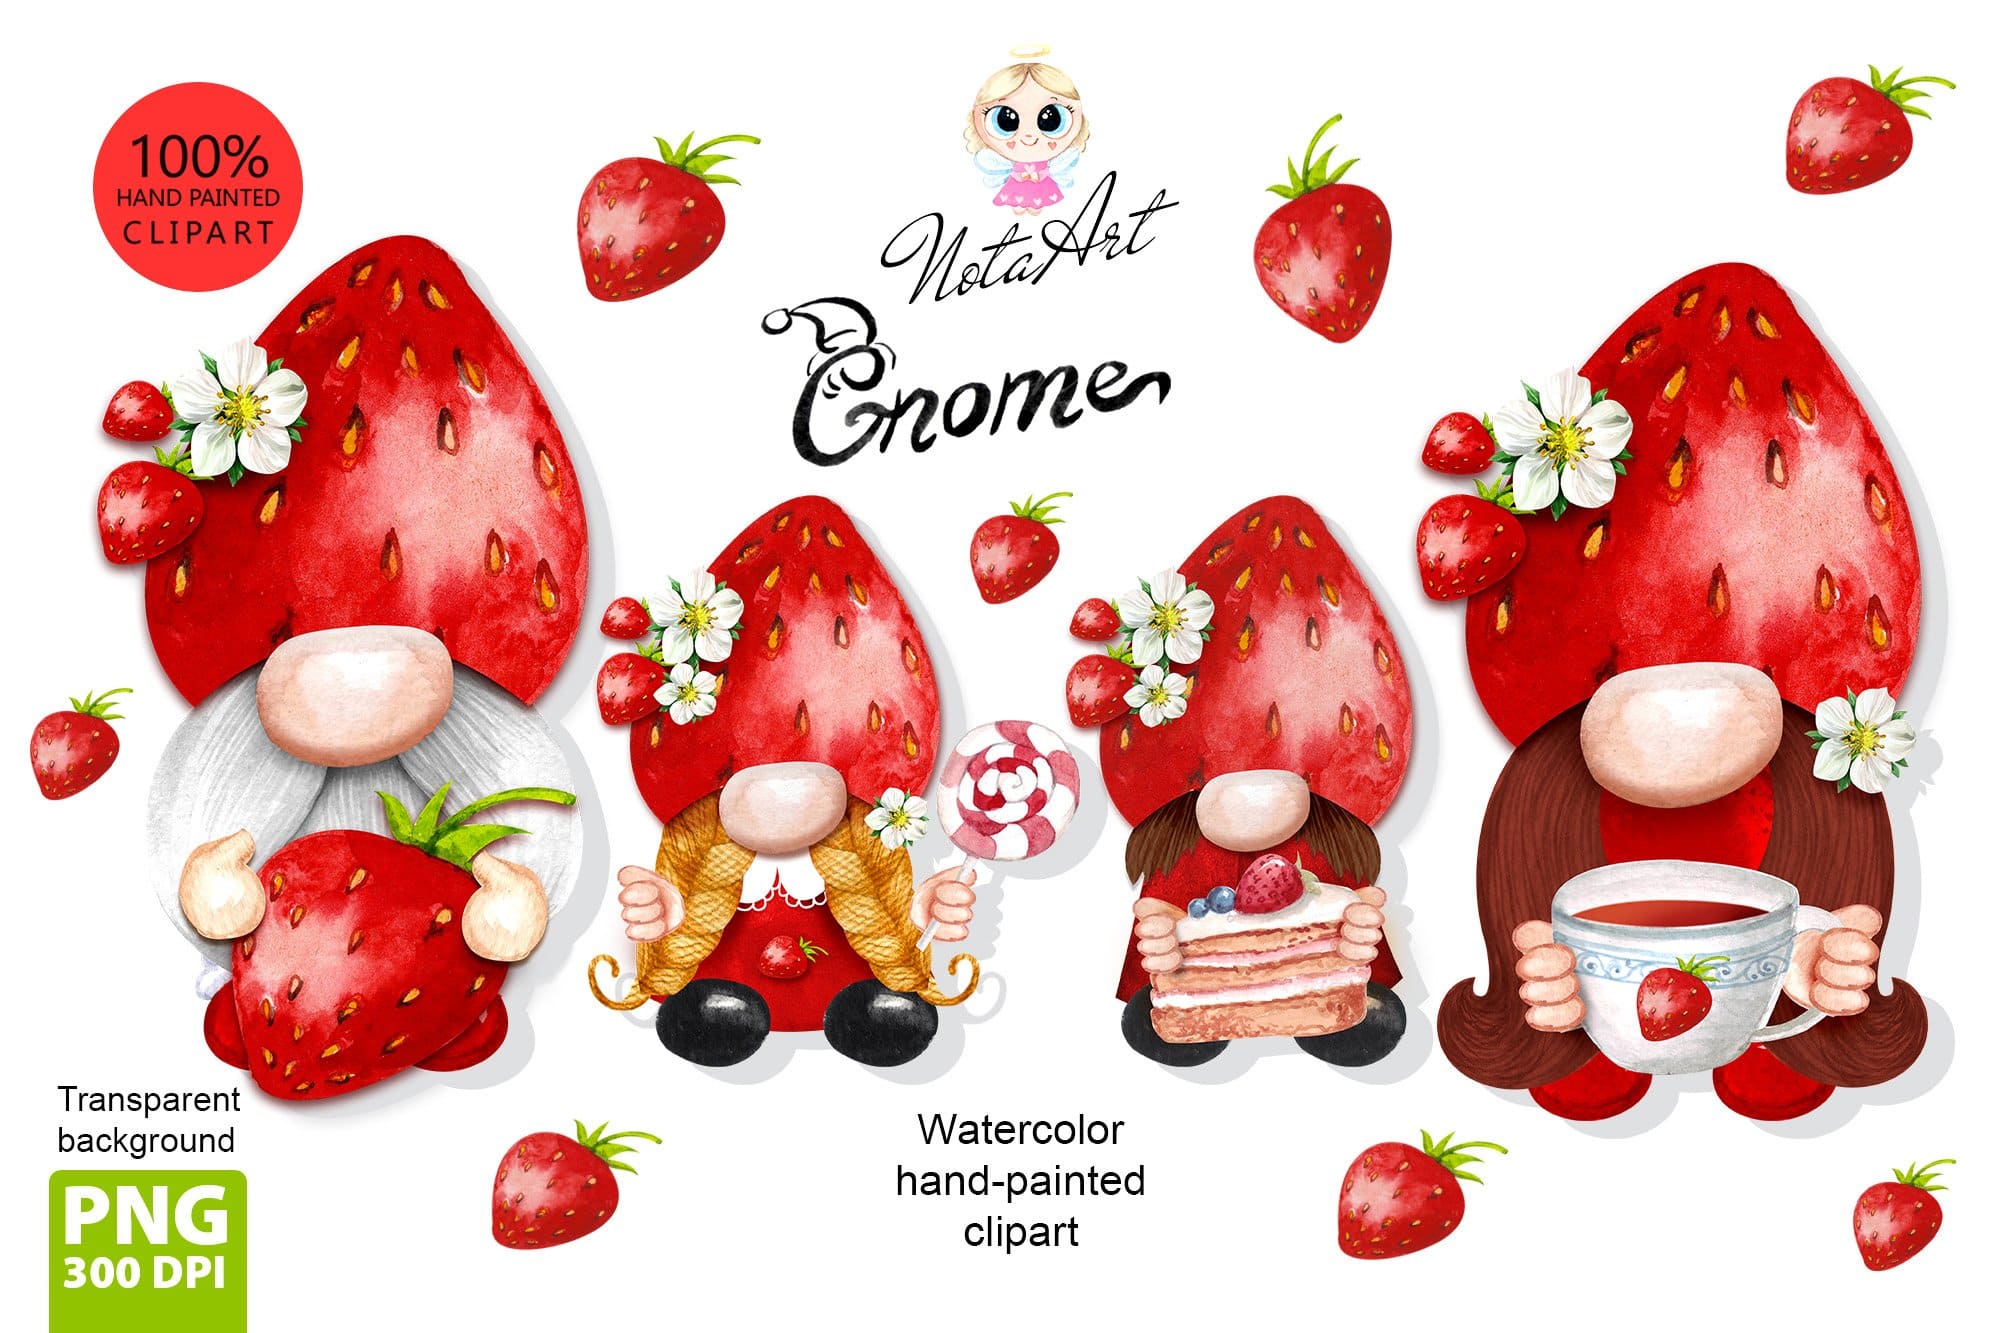 Gnome and strawberries on the transparent background.